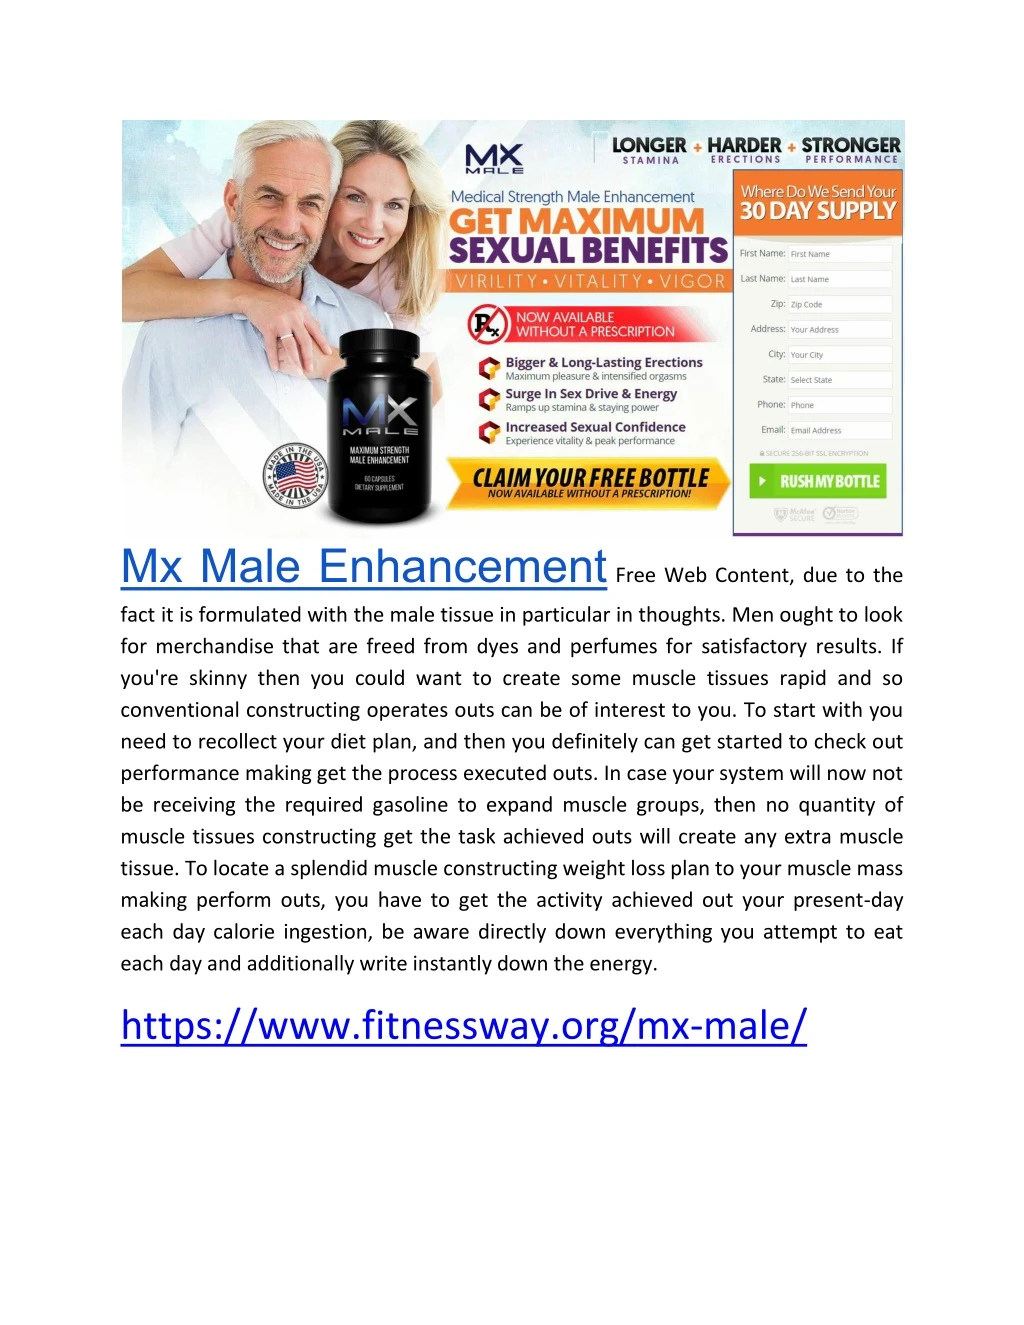 mx male enhancement free web content due to the